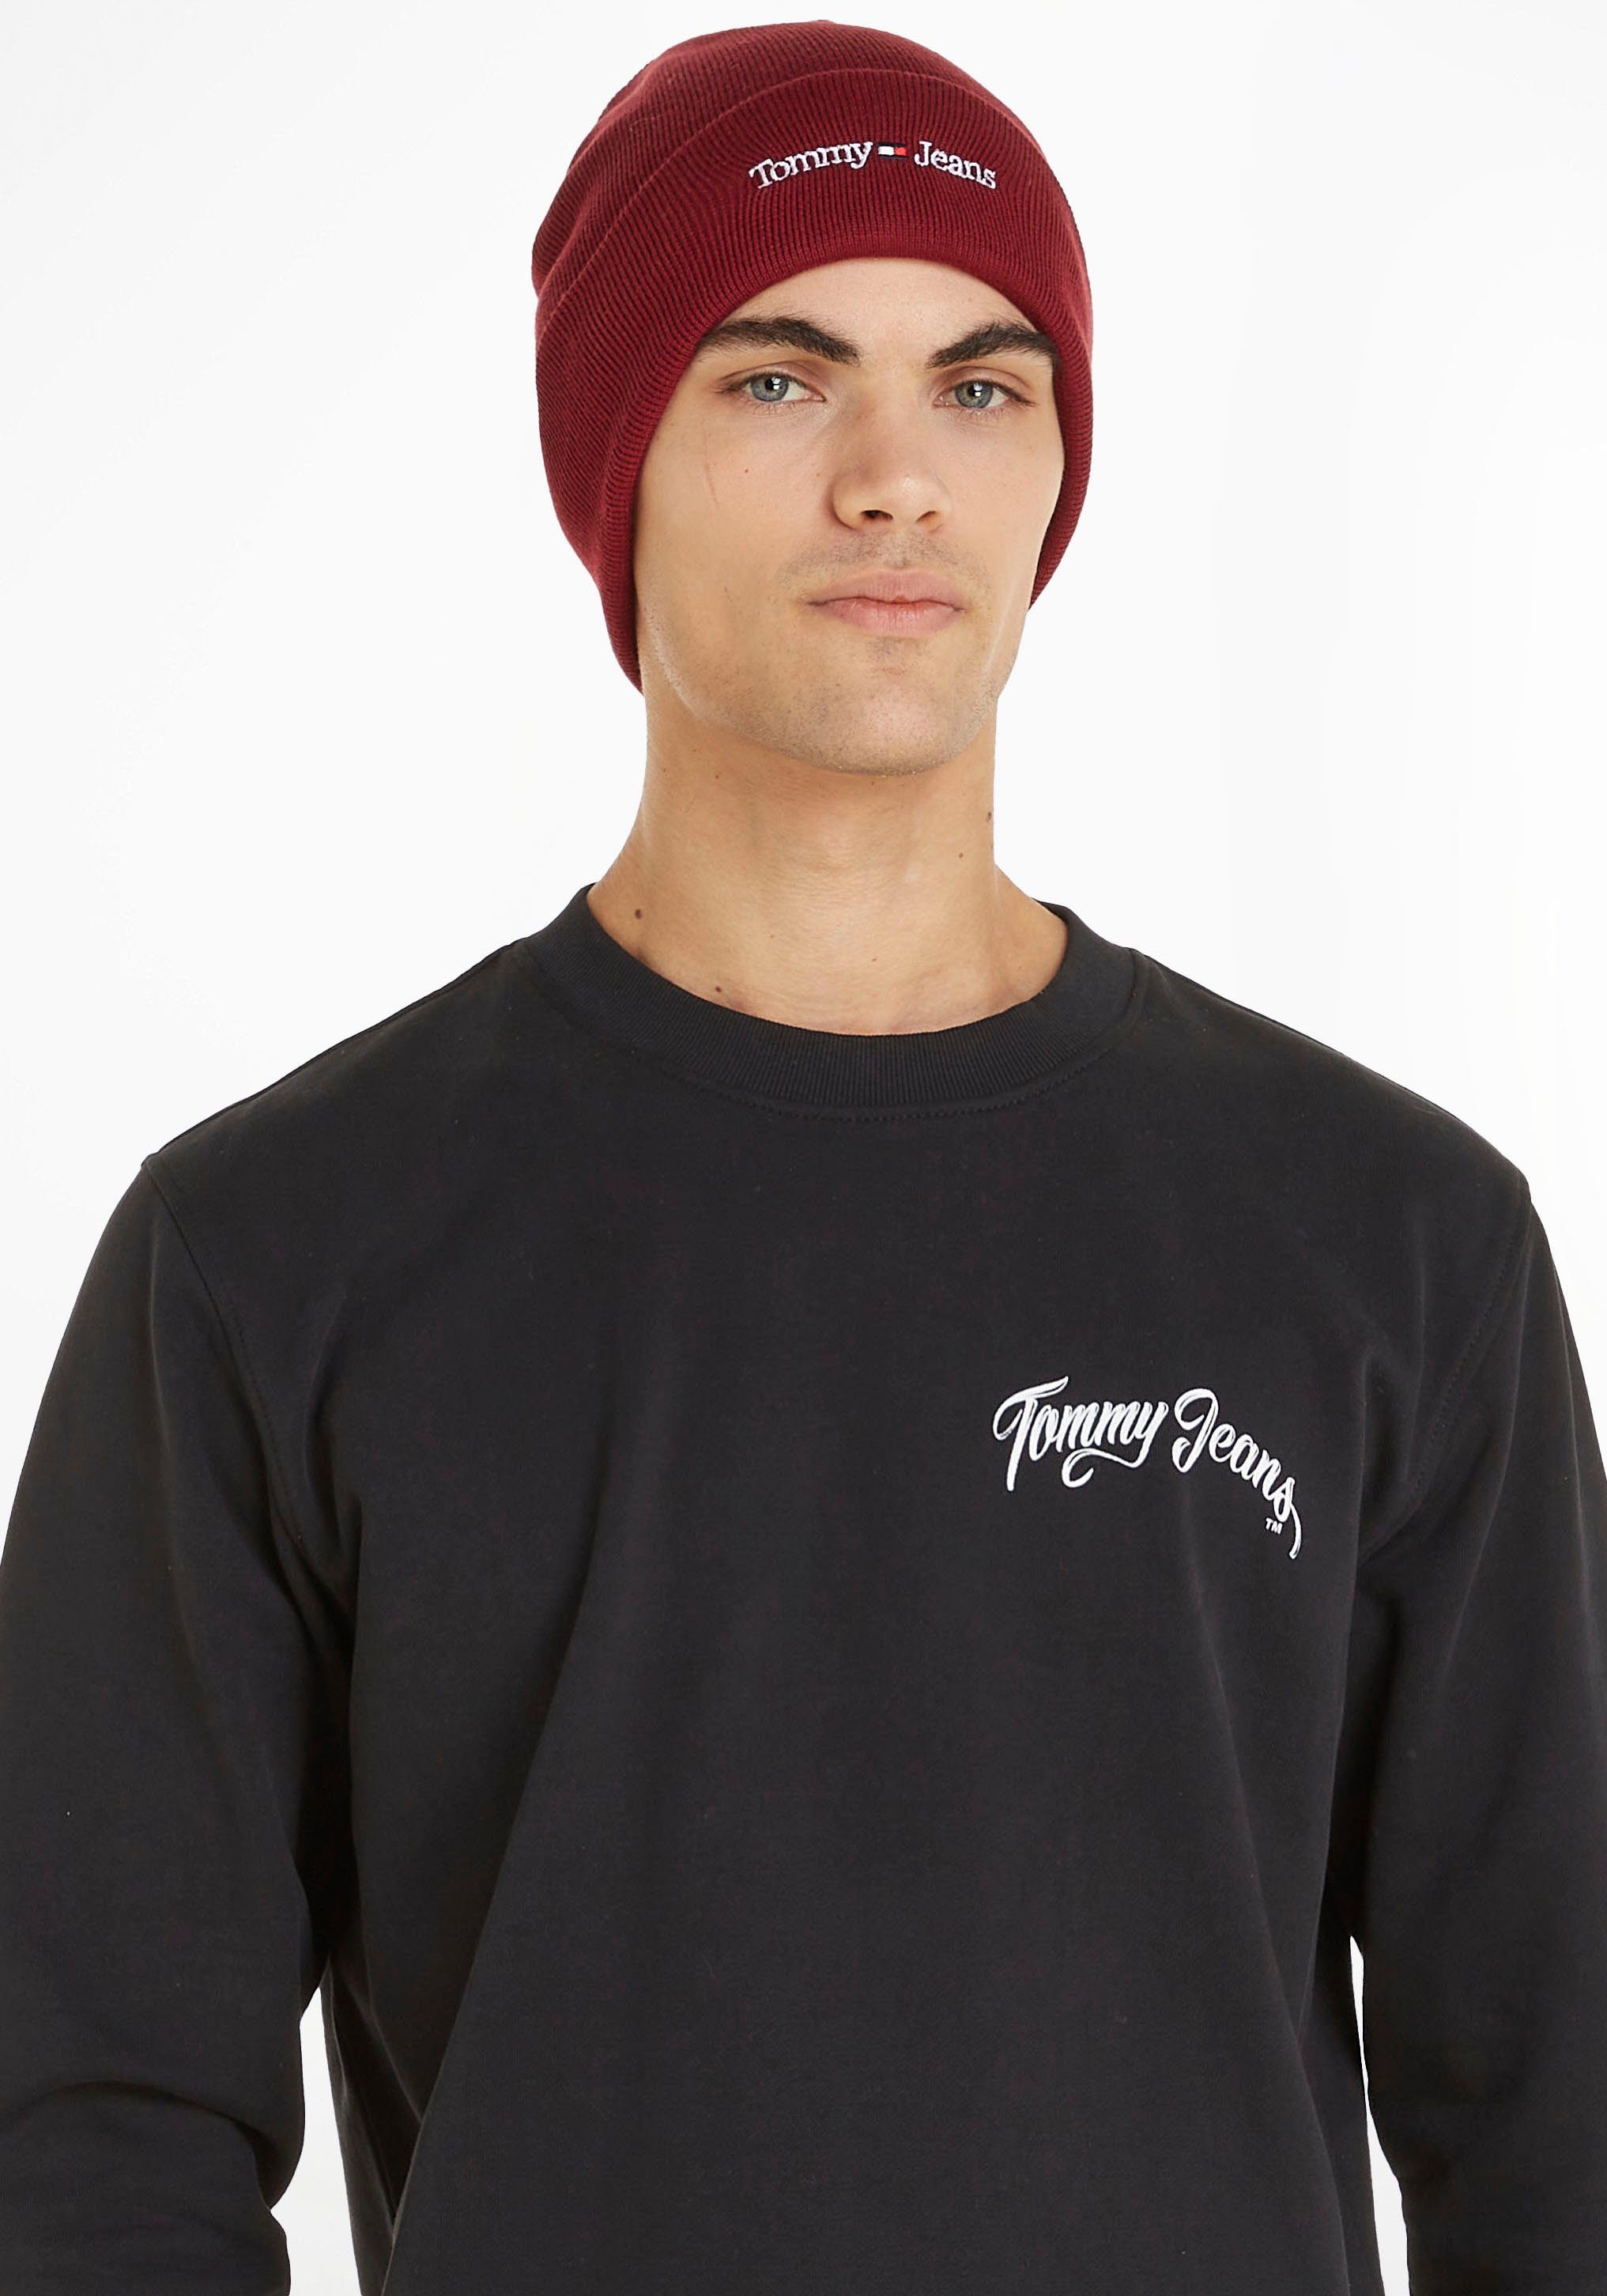 TJM BEANIE Beanie Tommy Jeans Rouge SPORT